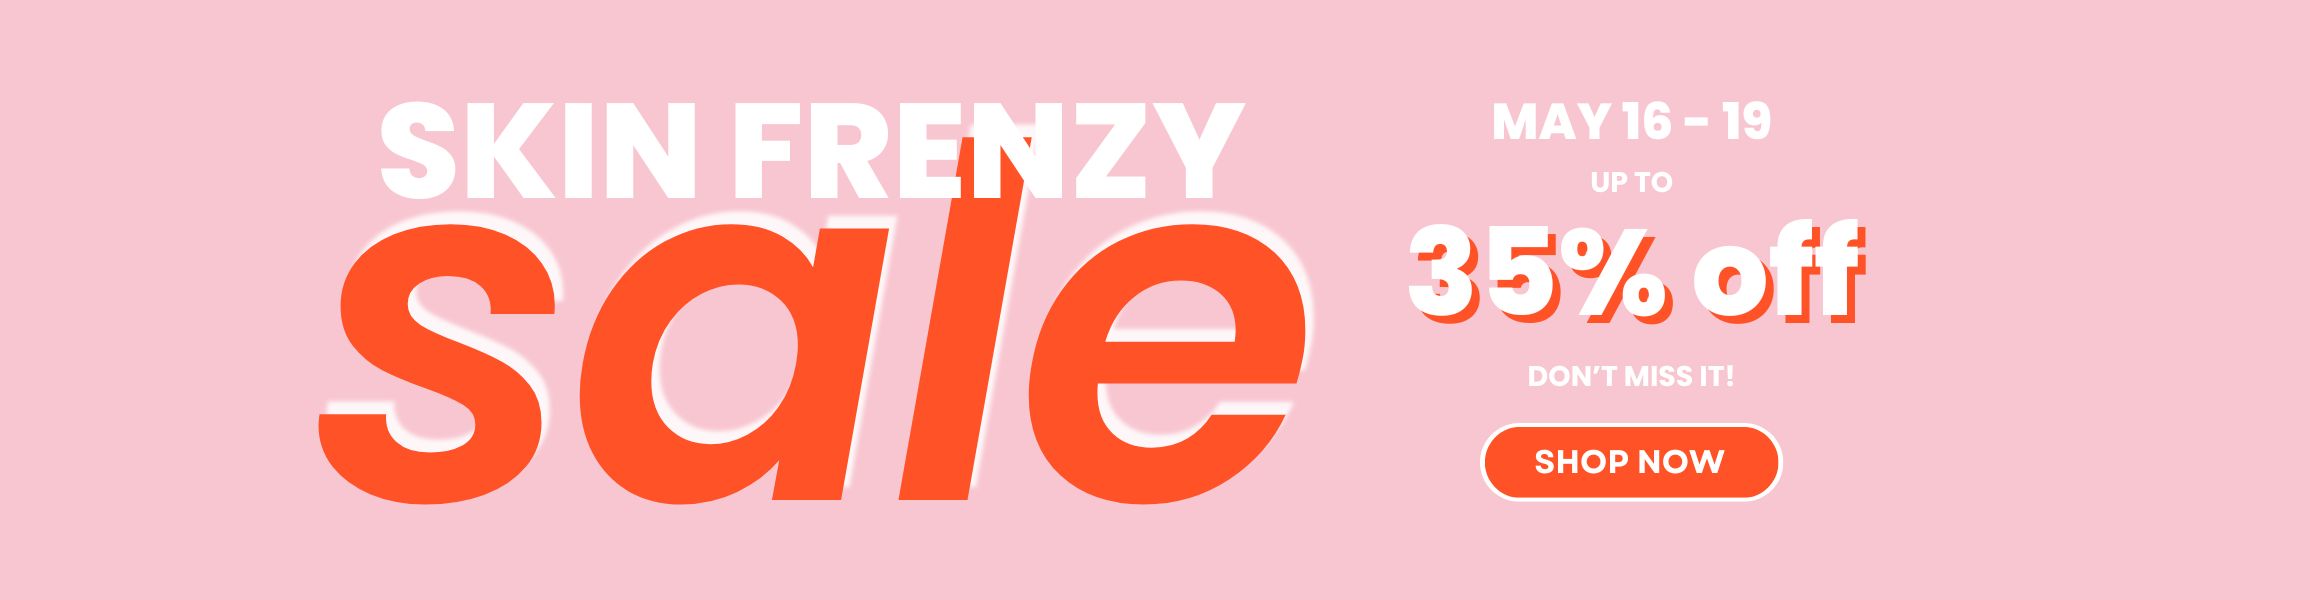 Skin Frenzy Sale - Up to 35% Off Selected Products. Ends Sunday 19th May.